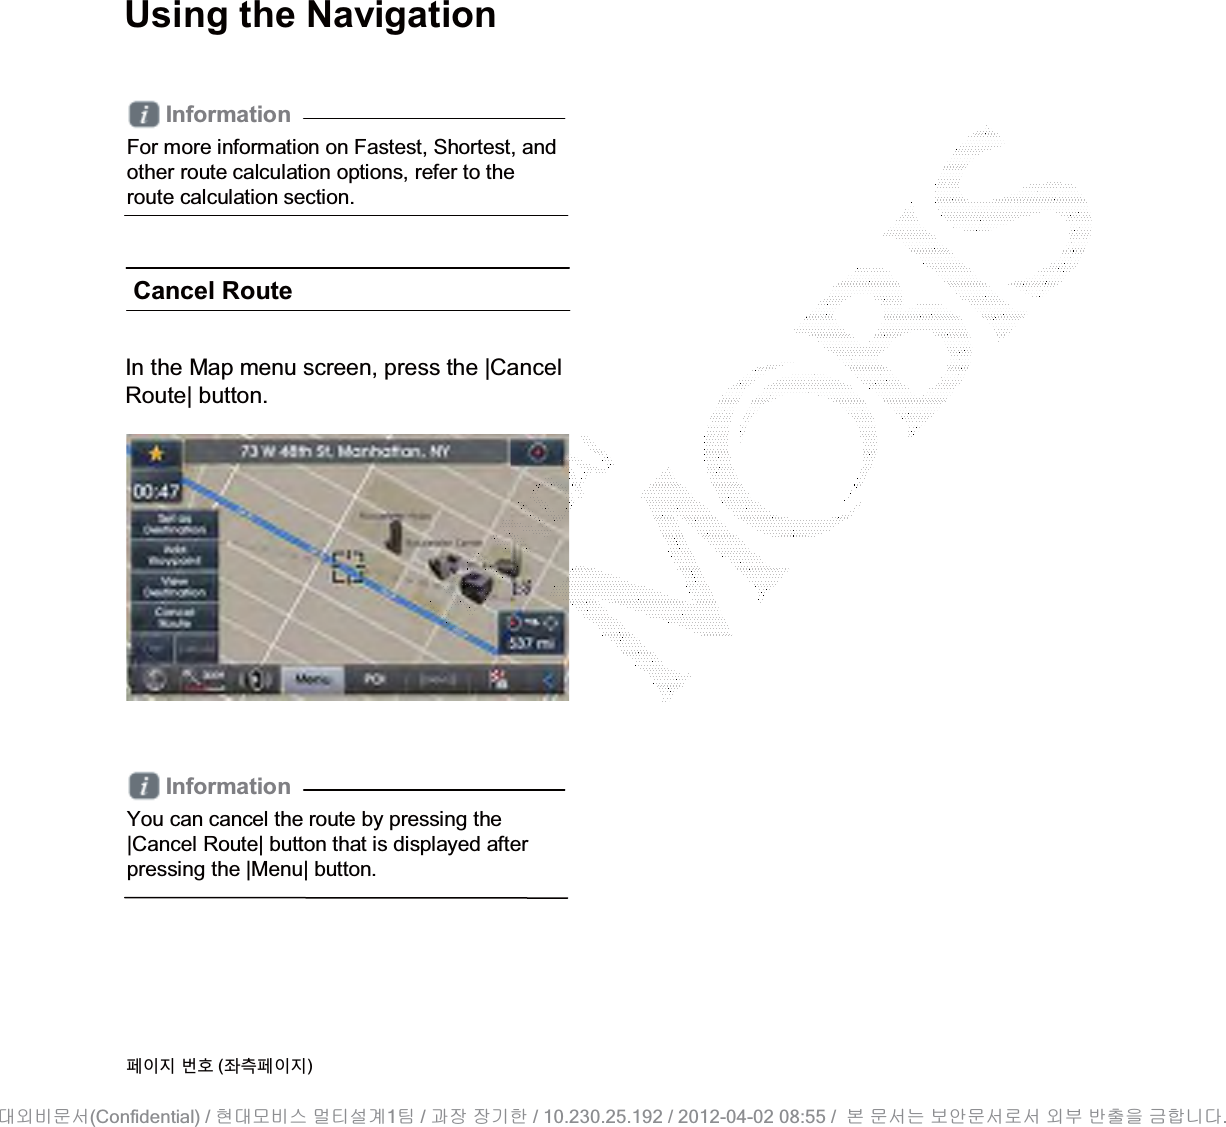 Using the NavigationInformationFor more information on Fastest, Shortest, and other route calculation options, refer to the route calculation section.Cancel RouteInformationYou can cancel the route by pressing the |Cancel Route| button that is displayed after pressing the |Menu| button.૓ࢇए ء୎ (্ࣛ૓ࢇए)In the Map menu screen, press the |Cancel Route| button.(Confidential) /    1  /     / 10.230.25.192 / 2012-04-02 08:55 /             .␴㞬⽸ⱬ㉐ 䜸␴⯜⽸㏘ ⭴䐤㉘᷸ 䐴 Ḱ㣙 㣙ὤ䚐 ⸬ ⱬ㉐⏈ ⸨㙼ⱬ㉐⦐㉐ 㞬⺴ ⵌ㻐㡸 Ἴ䚝⏼␘